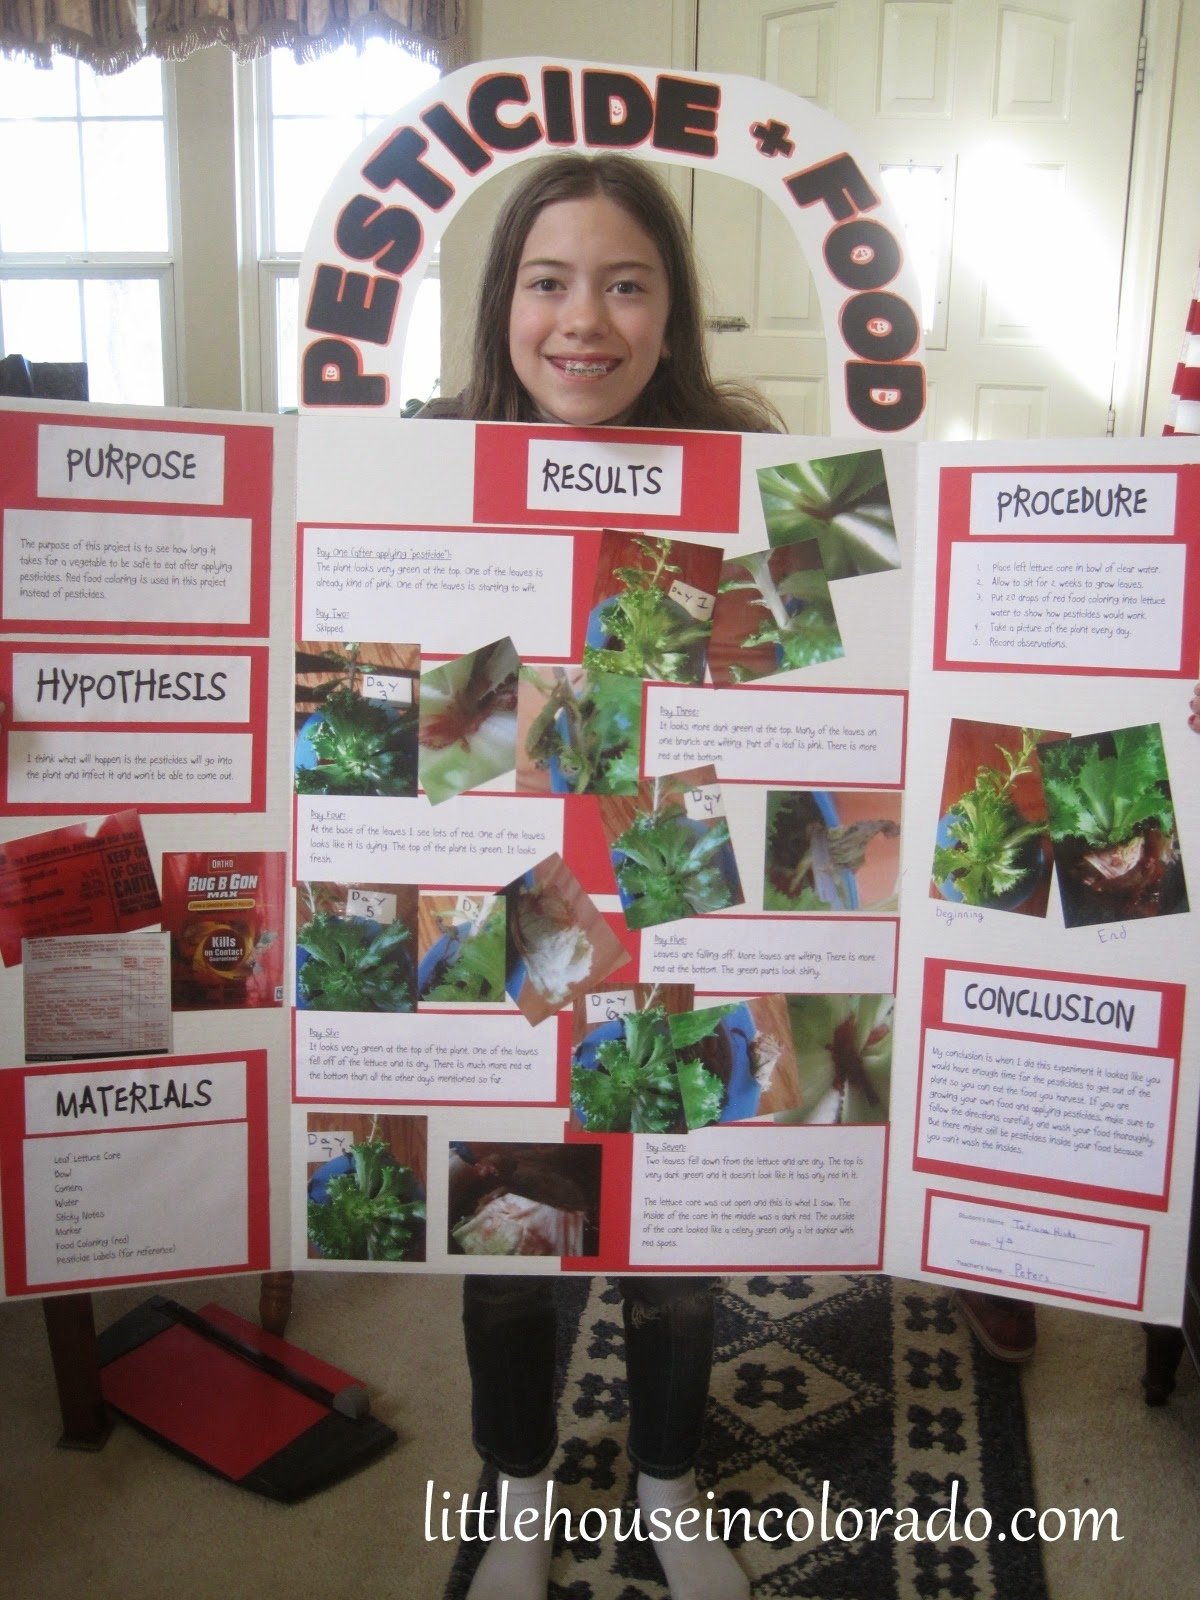 10 Famous Science Fair Projects Ideas For 4Th Graders little house in colorado 4th grade science fair project pesticides 1 2022